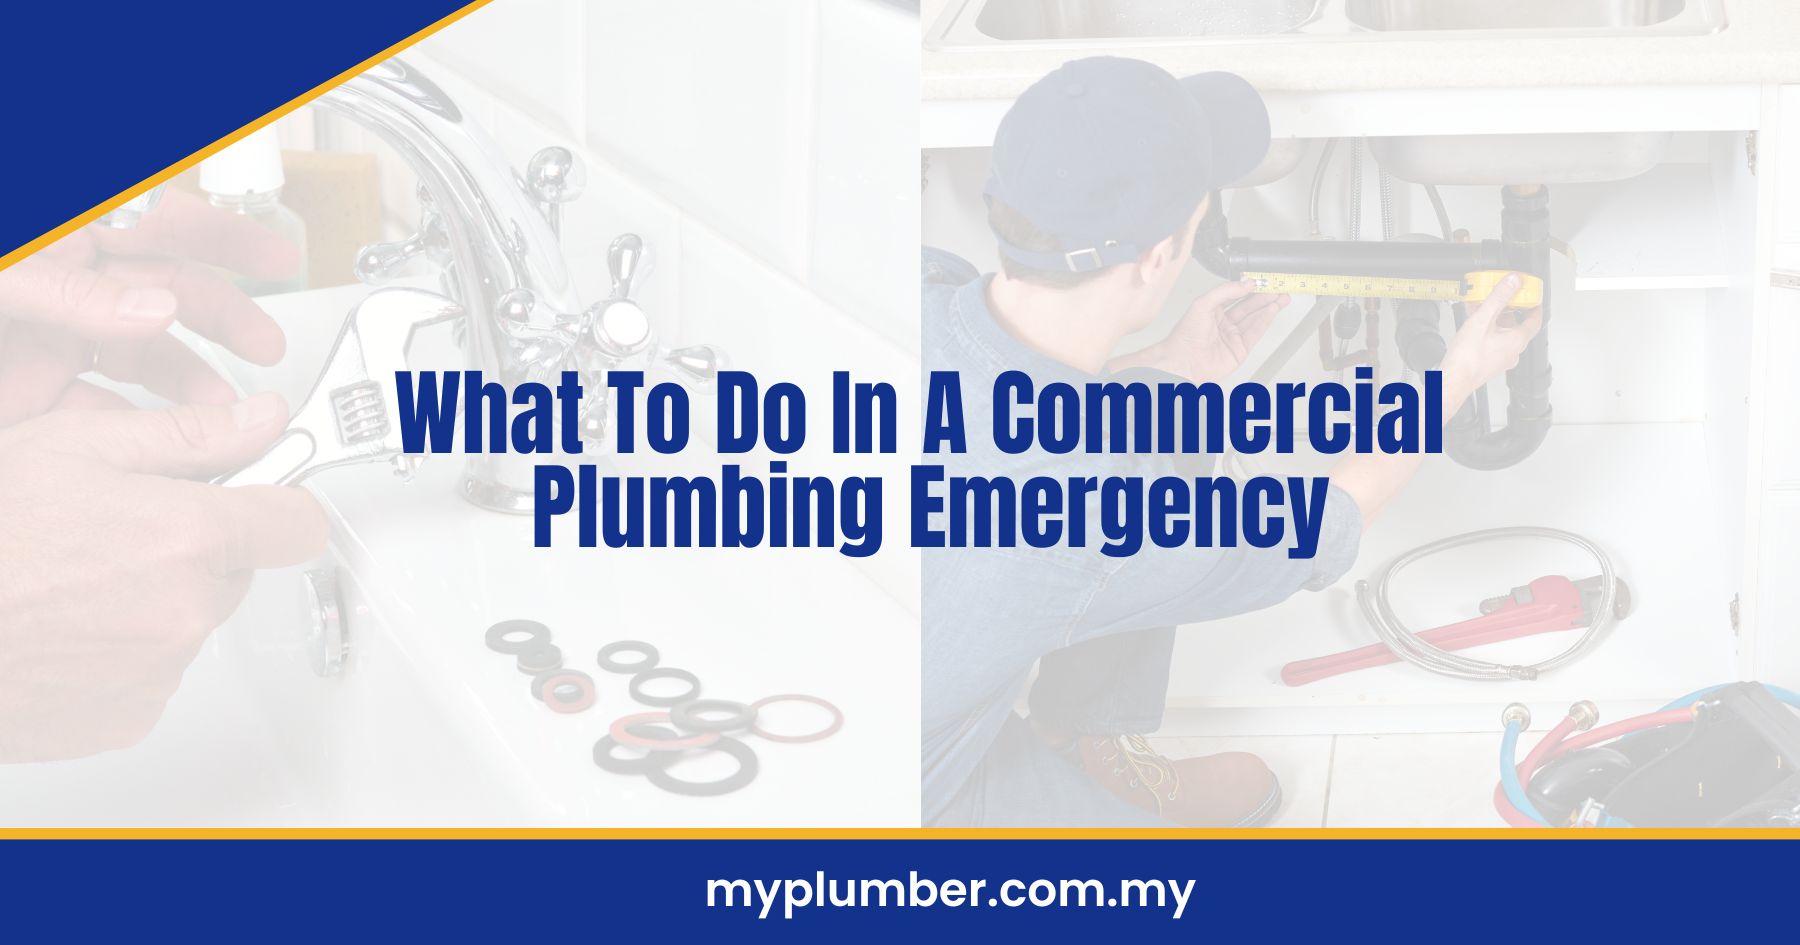 What To Do In A Commercial Plumbing Emergency